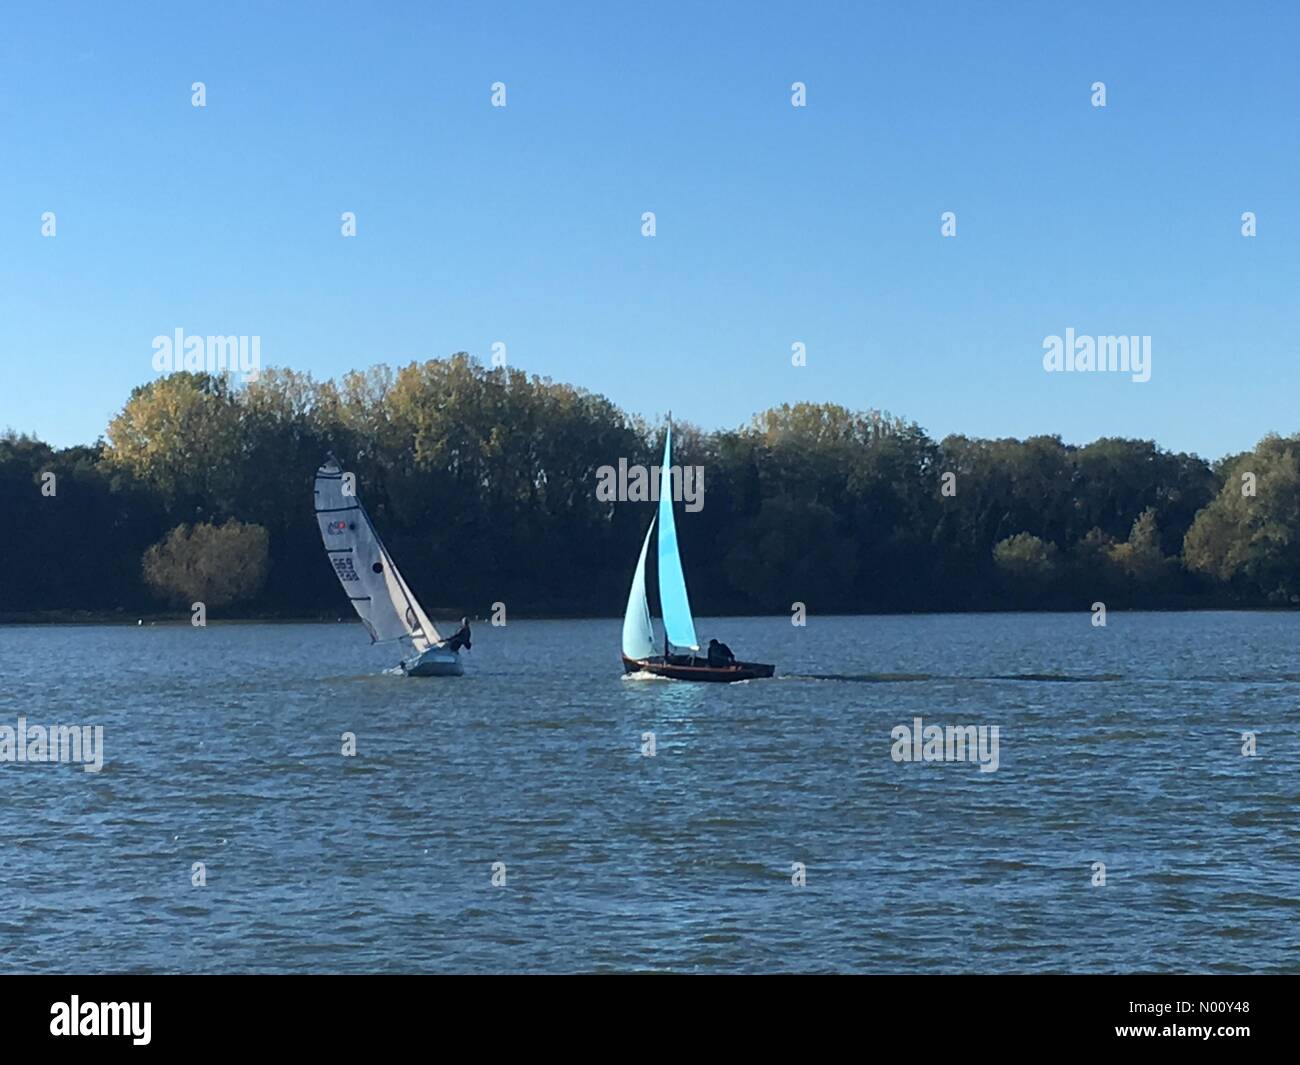 Bedford, UK. 21st Oct, 2018. Dinghy boat racing, with one dinghy tacking to change course, on a really warm sunny Sunday in October on Priory Marina in Bedford, England on October 21, 2018. Albany/Stockimo Live News Martin Parker Credit: Martin Parker/StockimoNews/Alamy Live News Stock Photo